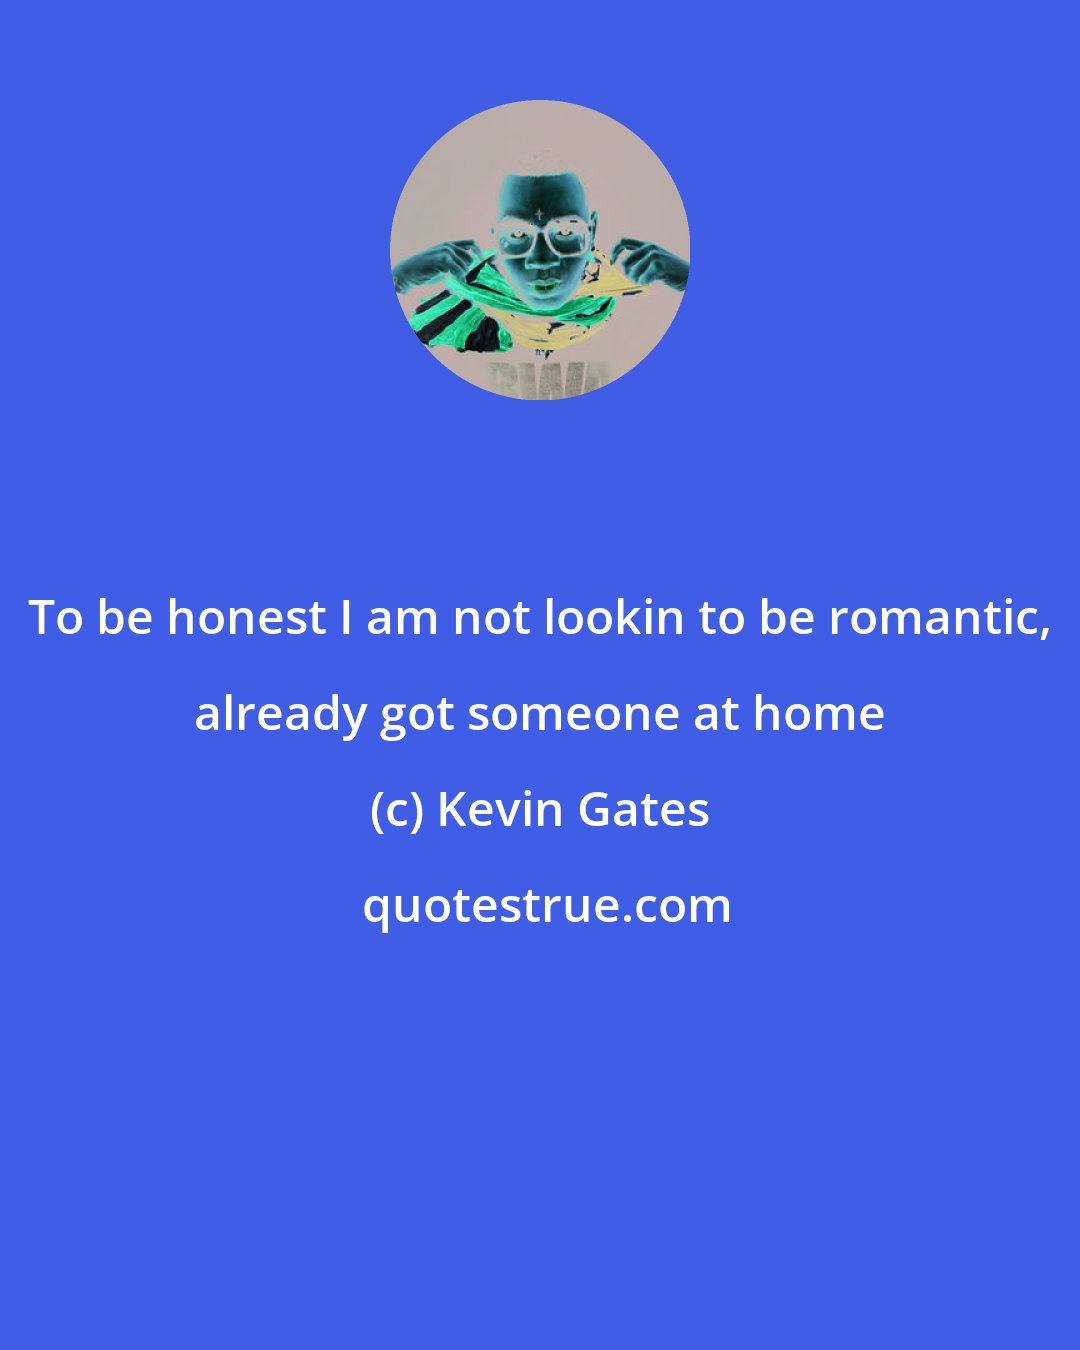 Kevin Gates: To be honest I am not lookin to be romantic, already got someone at home